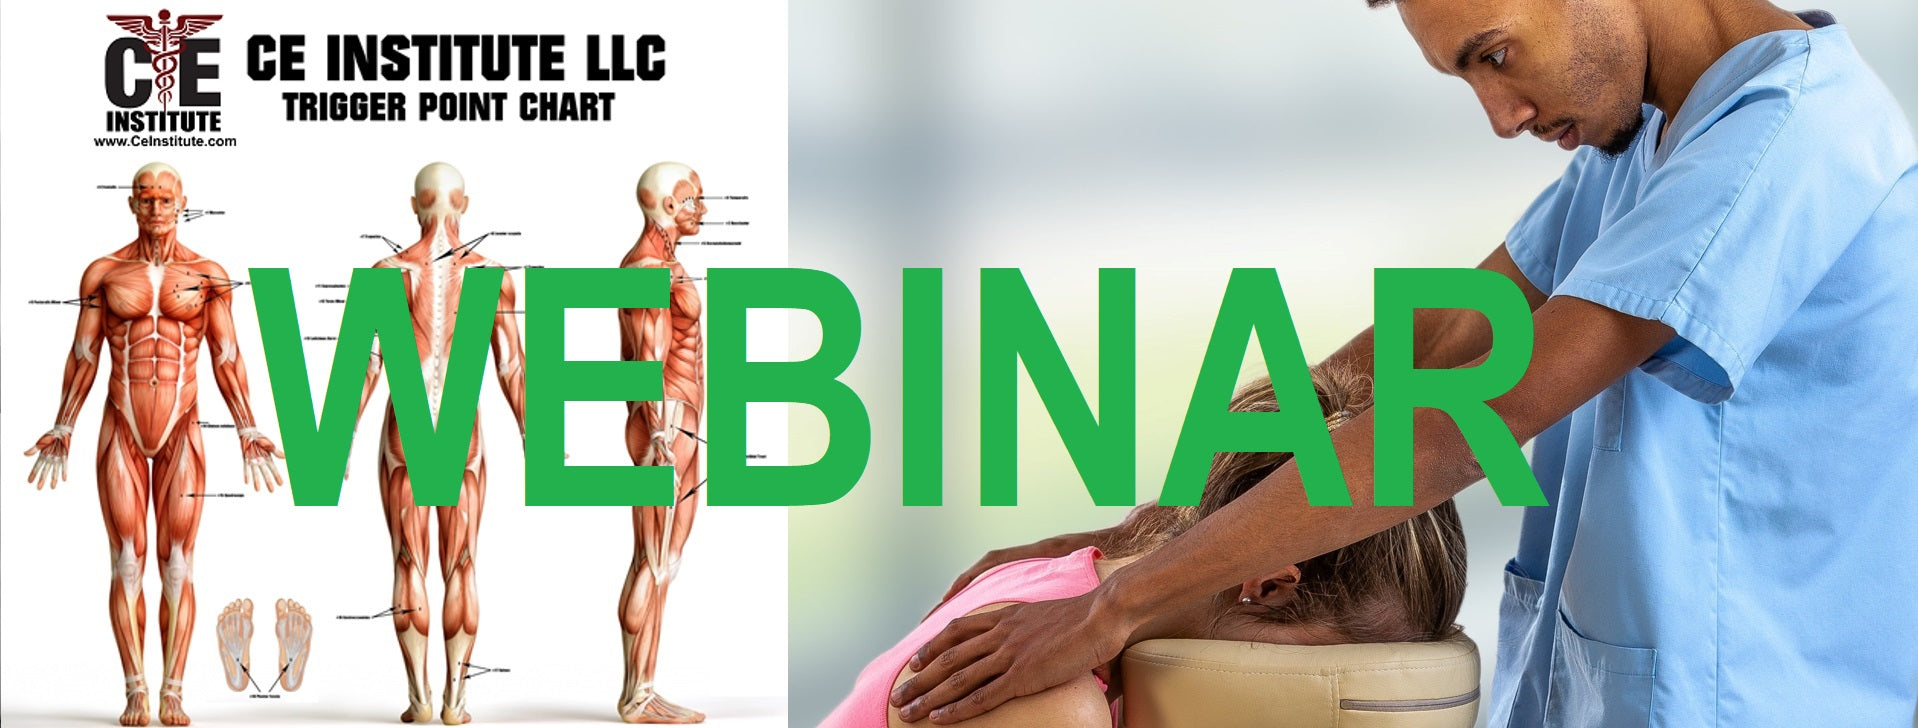 12 CE Trigger Point Therapy & Chair Massage (Computer-Based Live Interactive Webinar)